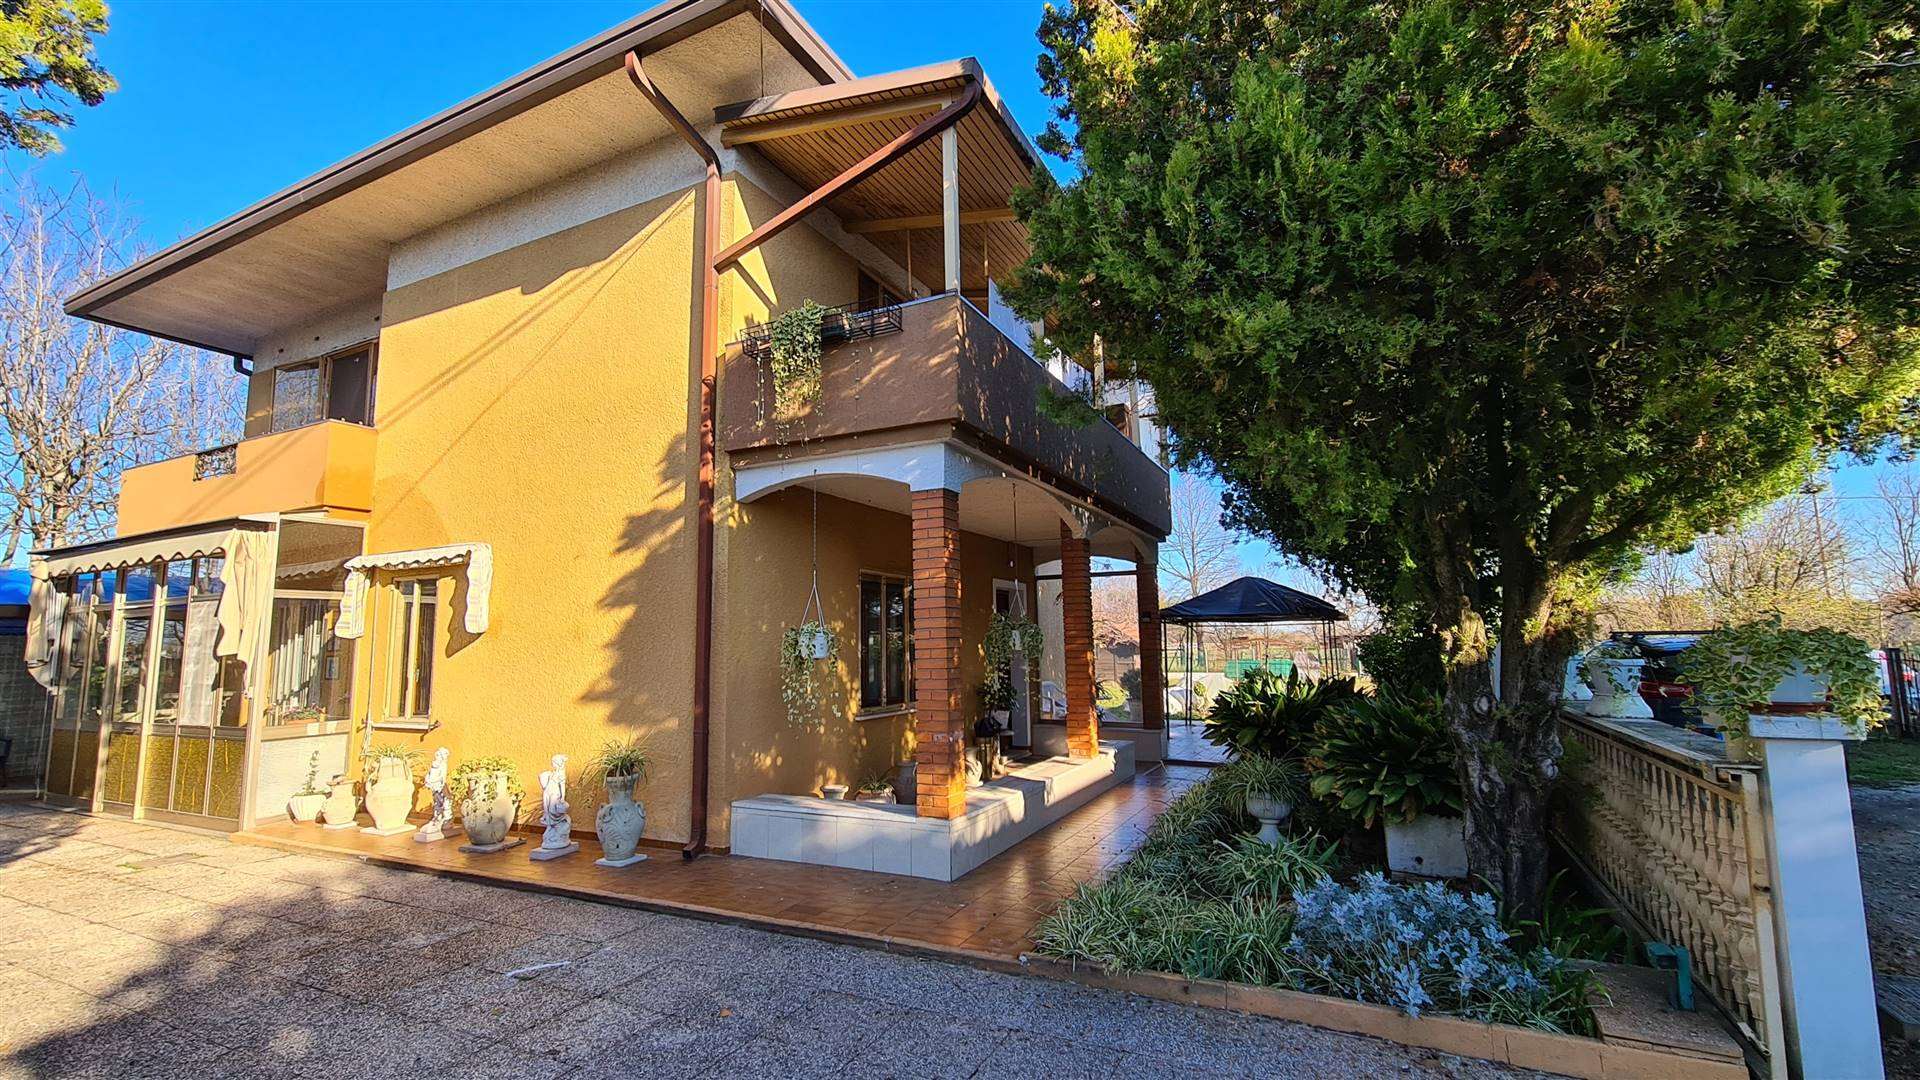 PAESE, Single house for sale of 250 Sq. mt., Habitable, Heating Individual heating system, Energetic class: E, Epi: 173,53 kwh/m2 year, placed at 